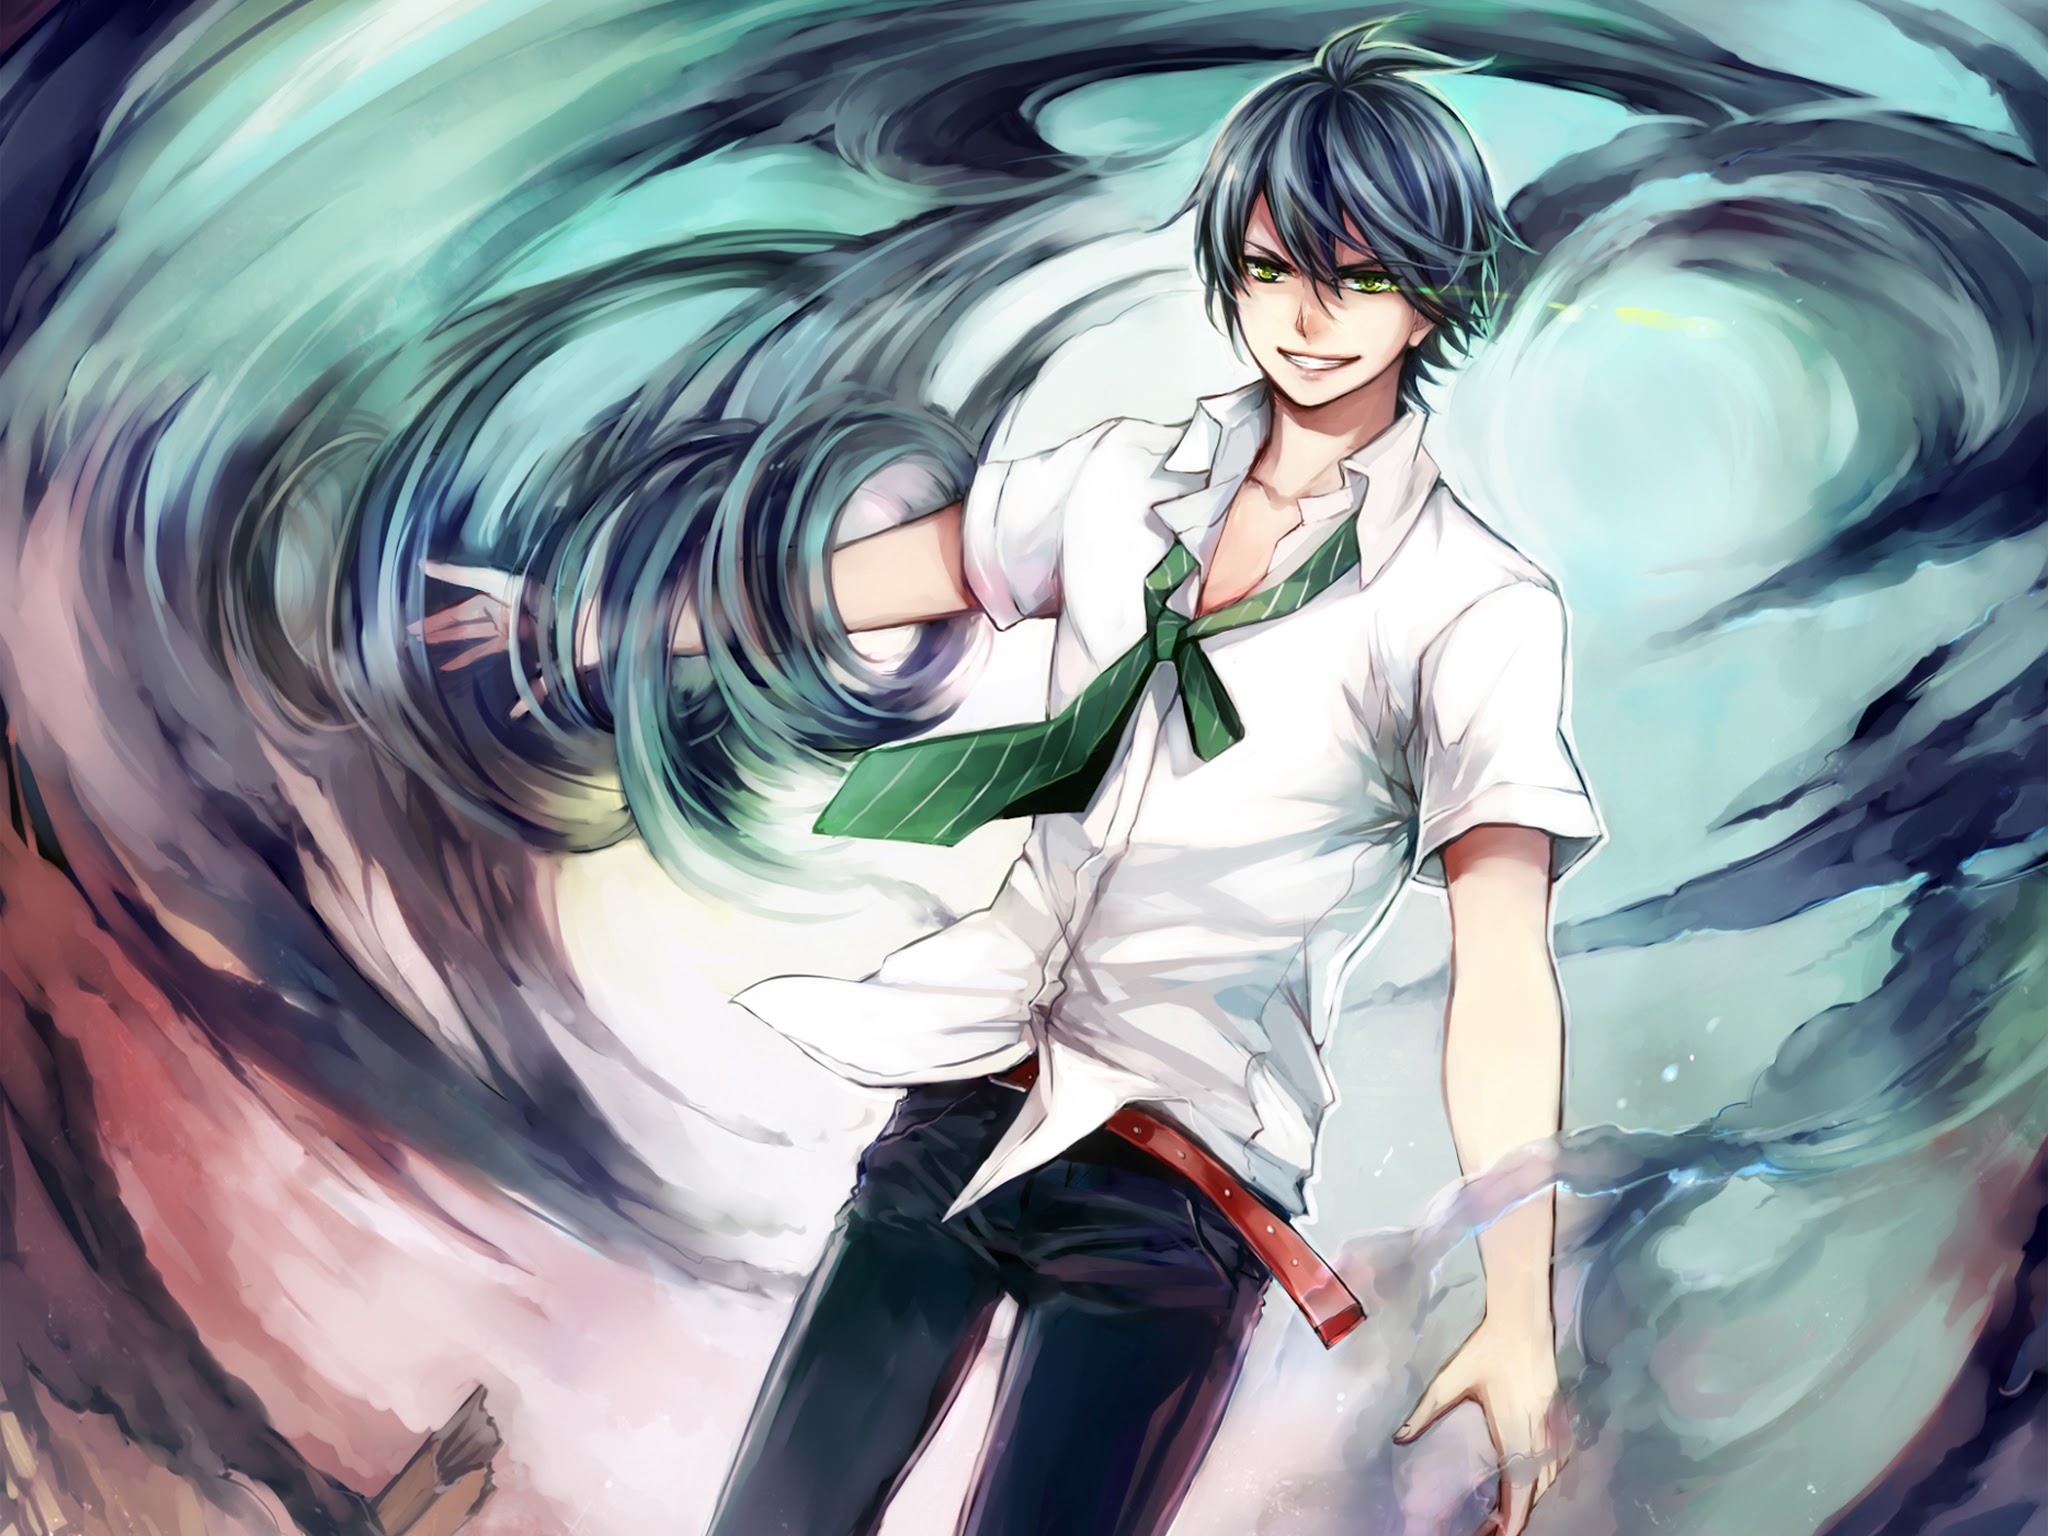 Anime+Male+Wind+Grin+Smile+HD+Wallpaper+Backgrounds+Image+Photo+Picture.jpg